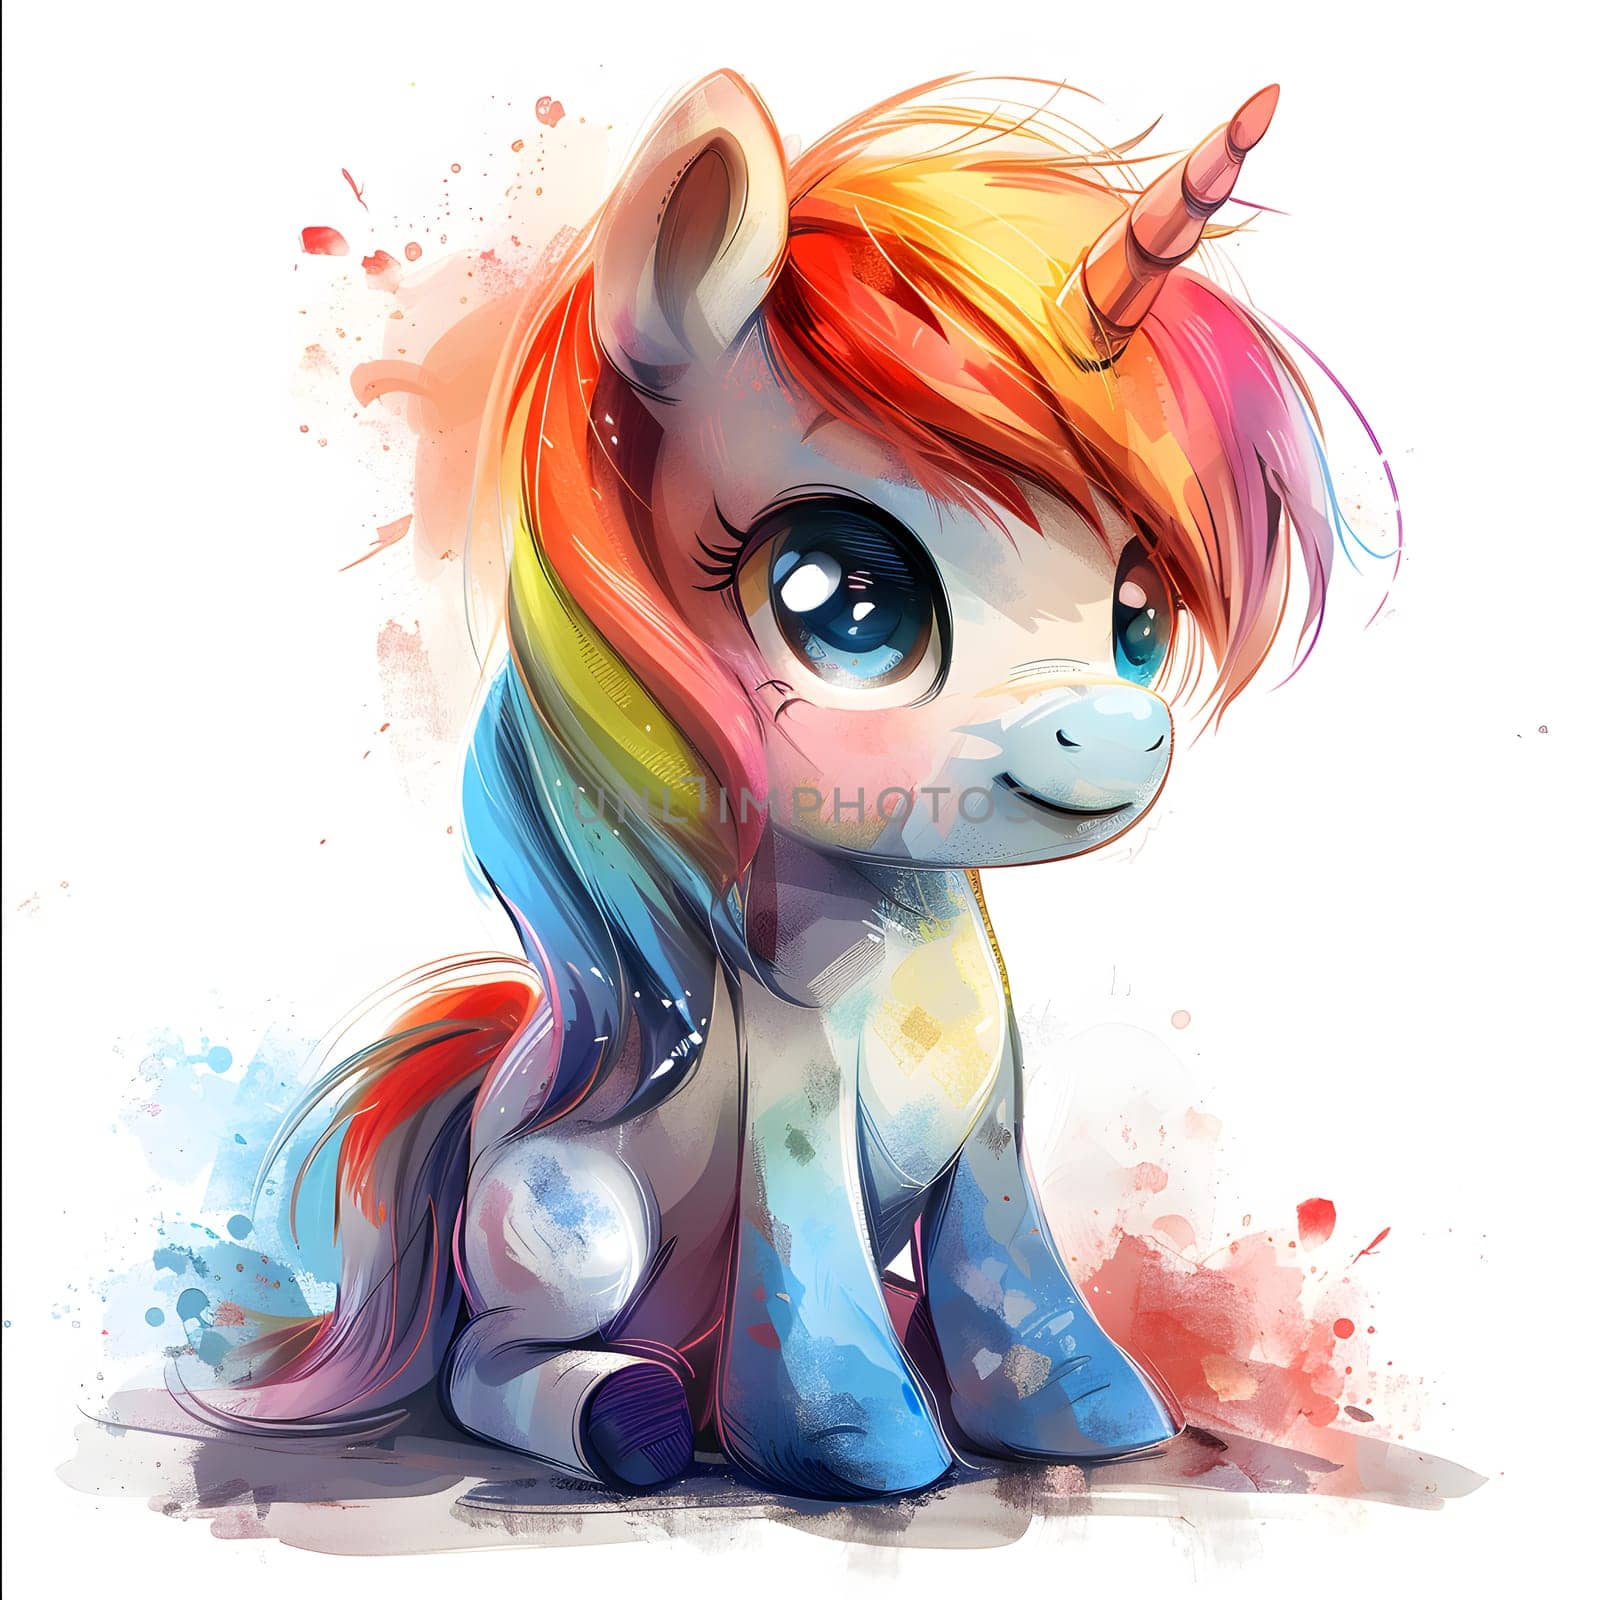 Cartoon unicorn with rainbow colors and horn on white background by Nadtochiy